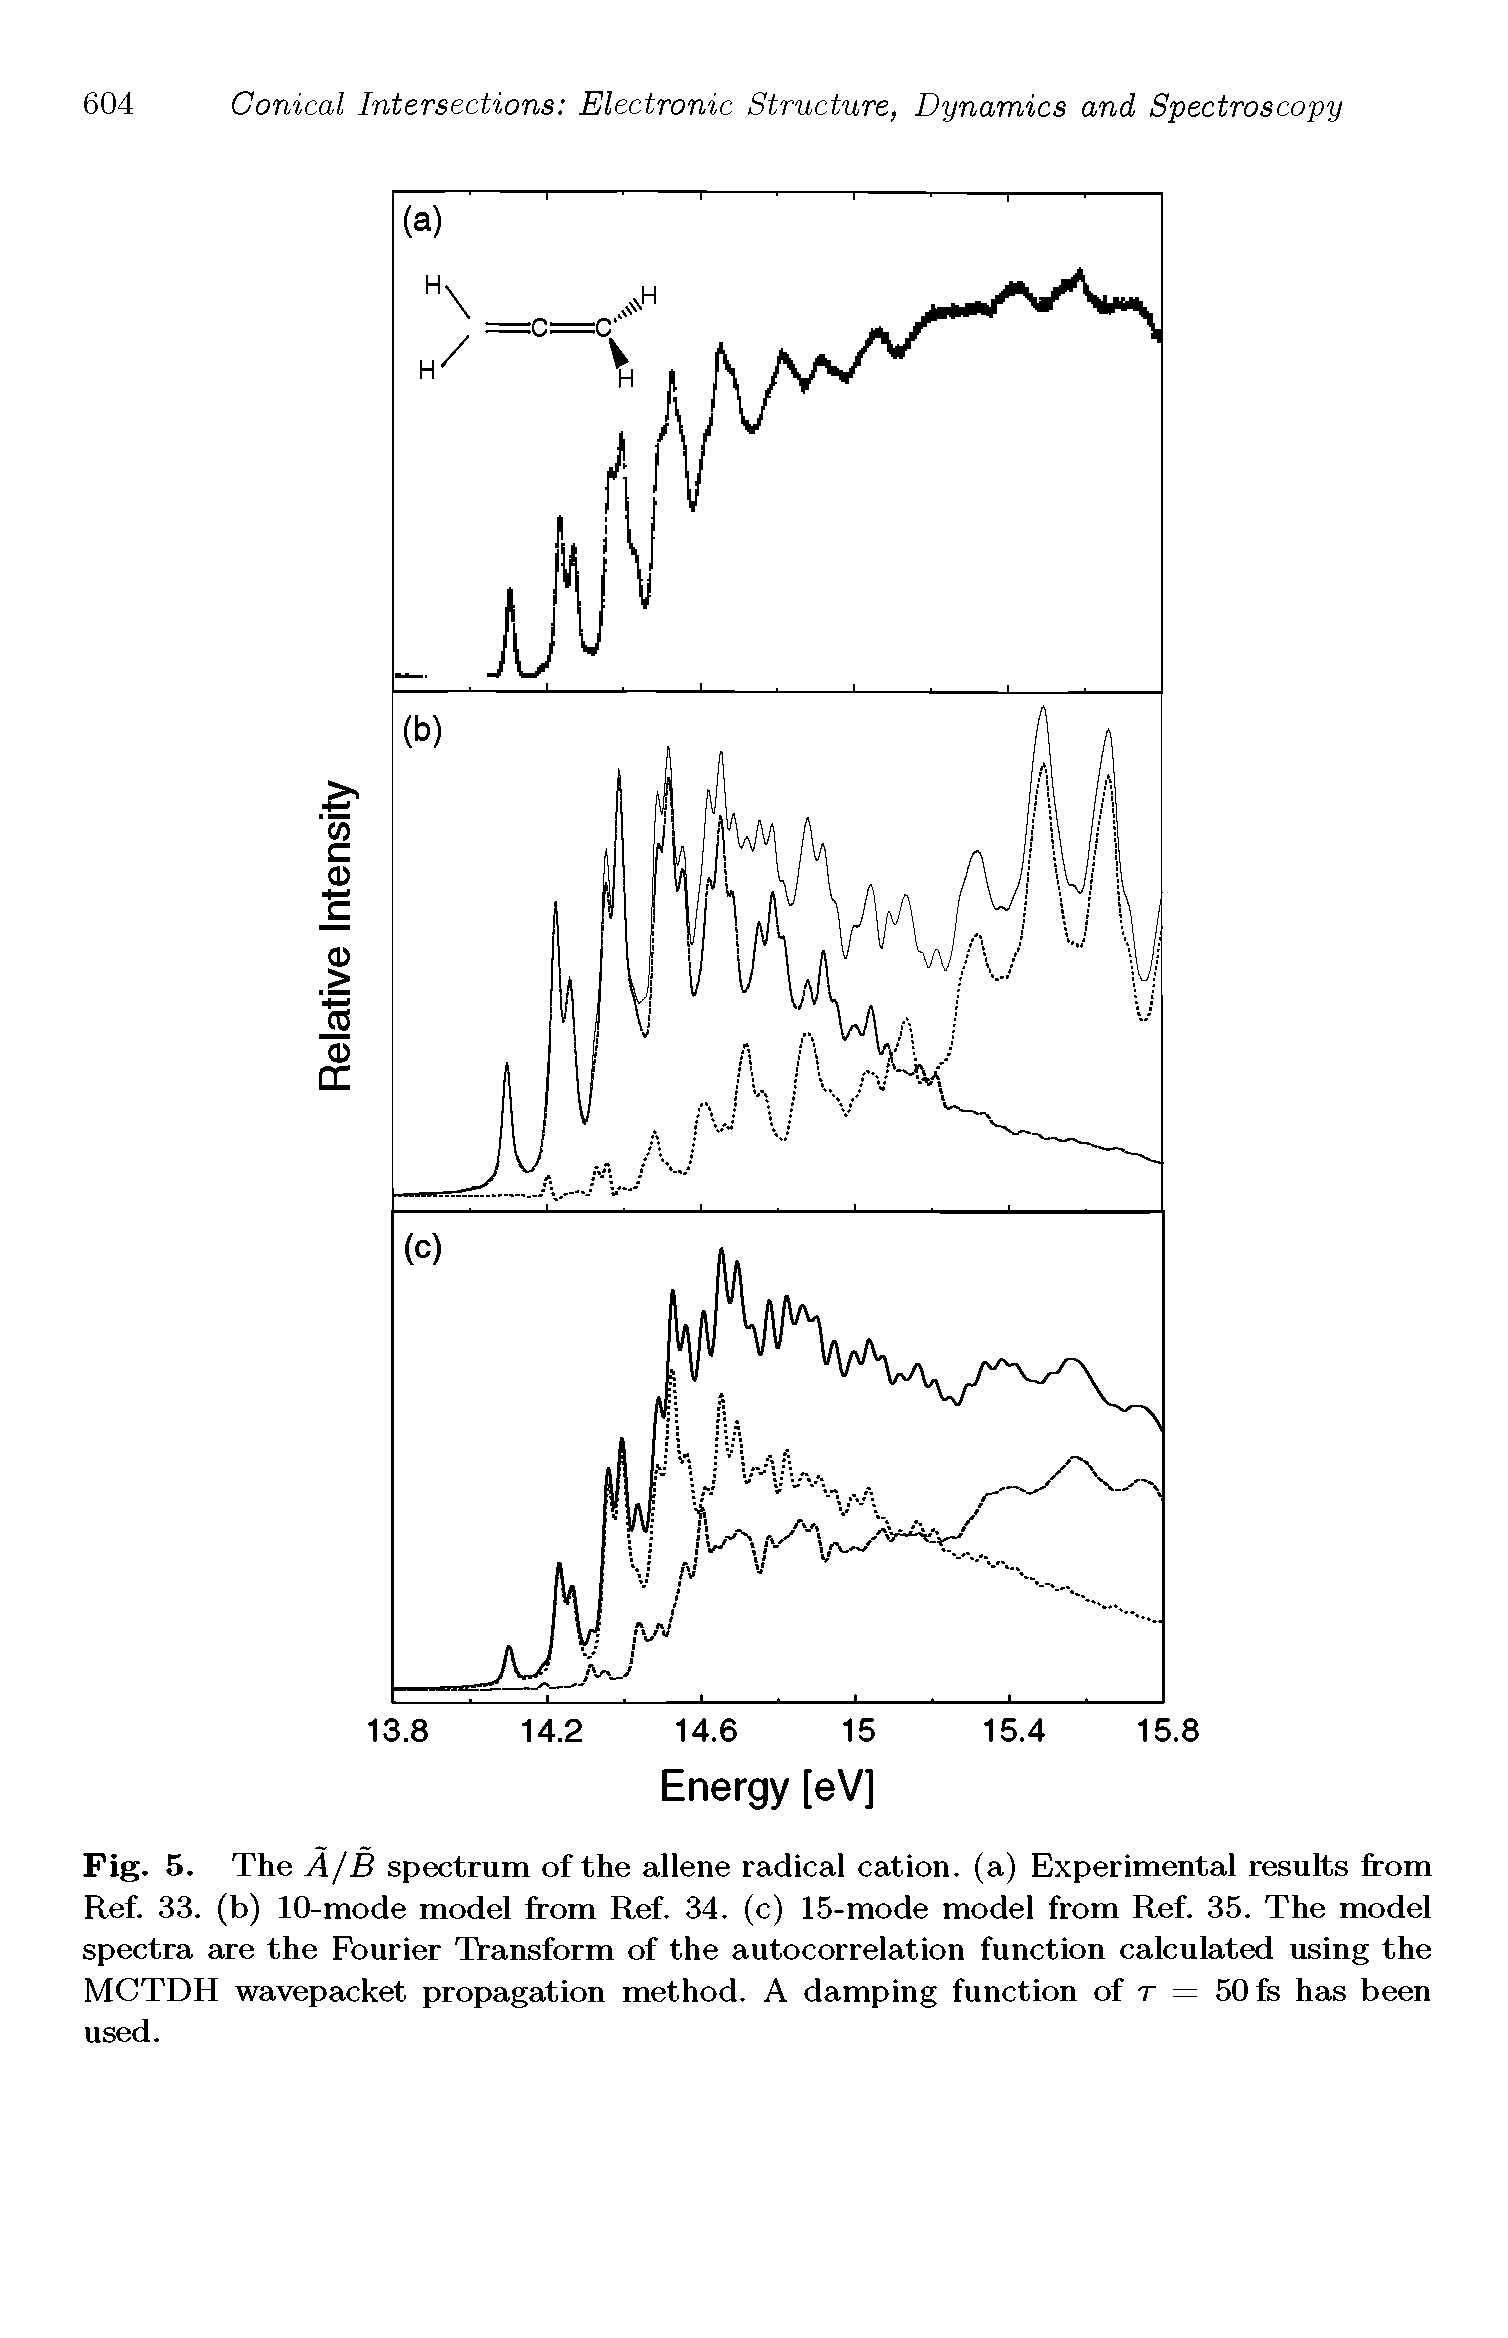 Fig. 5. The A/B spectrum of the allene radical cation, (a) Experimental results from Ref. 33. (b) 10-mode model from Ref. 34. (c) 15-mode model from Ref. 35. The model spectra are the Fourier Ttansform of the autocorrelation function calculated using the MCTDH wavepacket propagation method. A damping function of t = 50fe has been used.